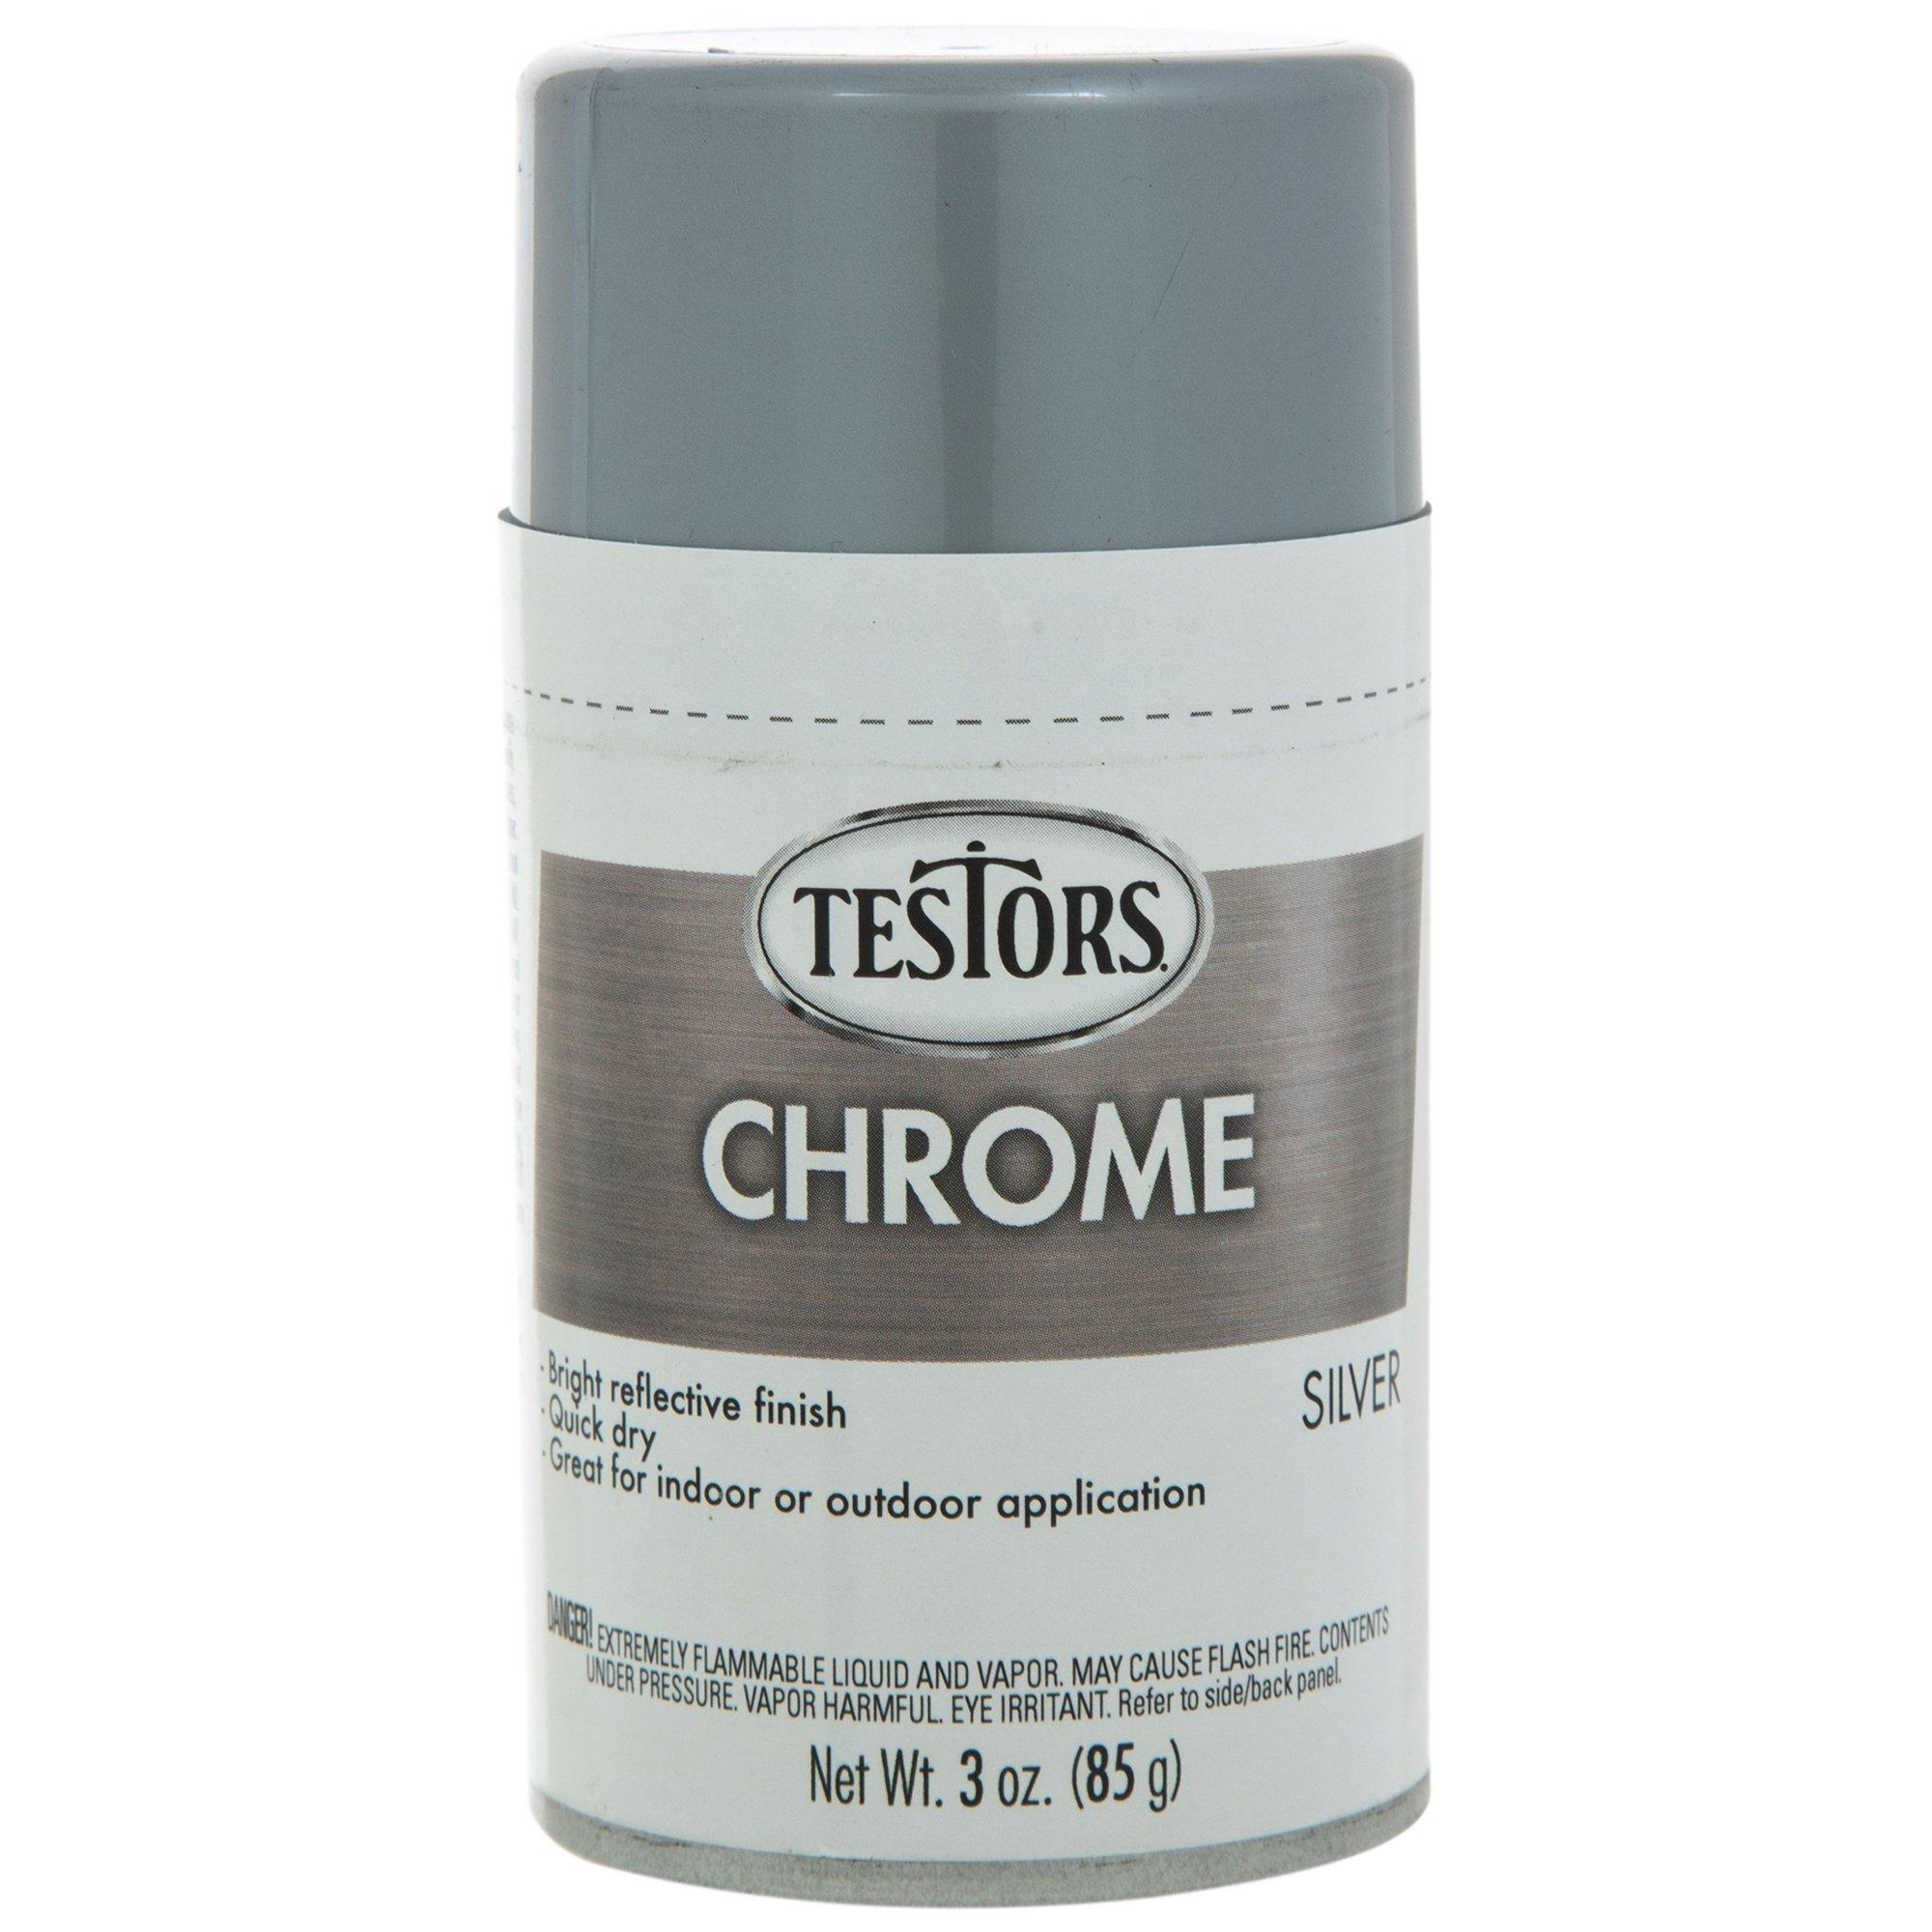  4 Pack of the Testors Dullcote Spray Lacquer 3oz : Arts, Crafts  & Sewing